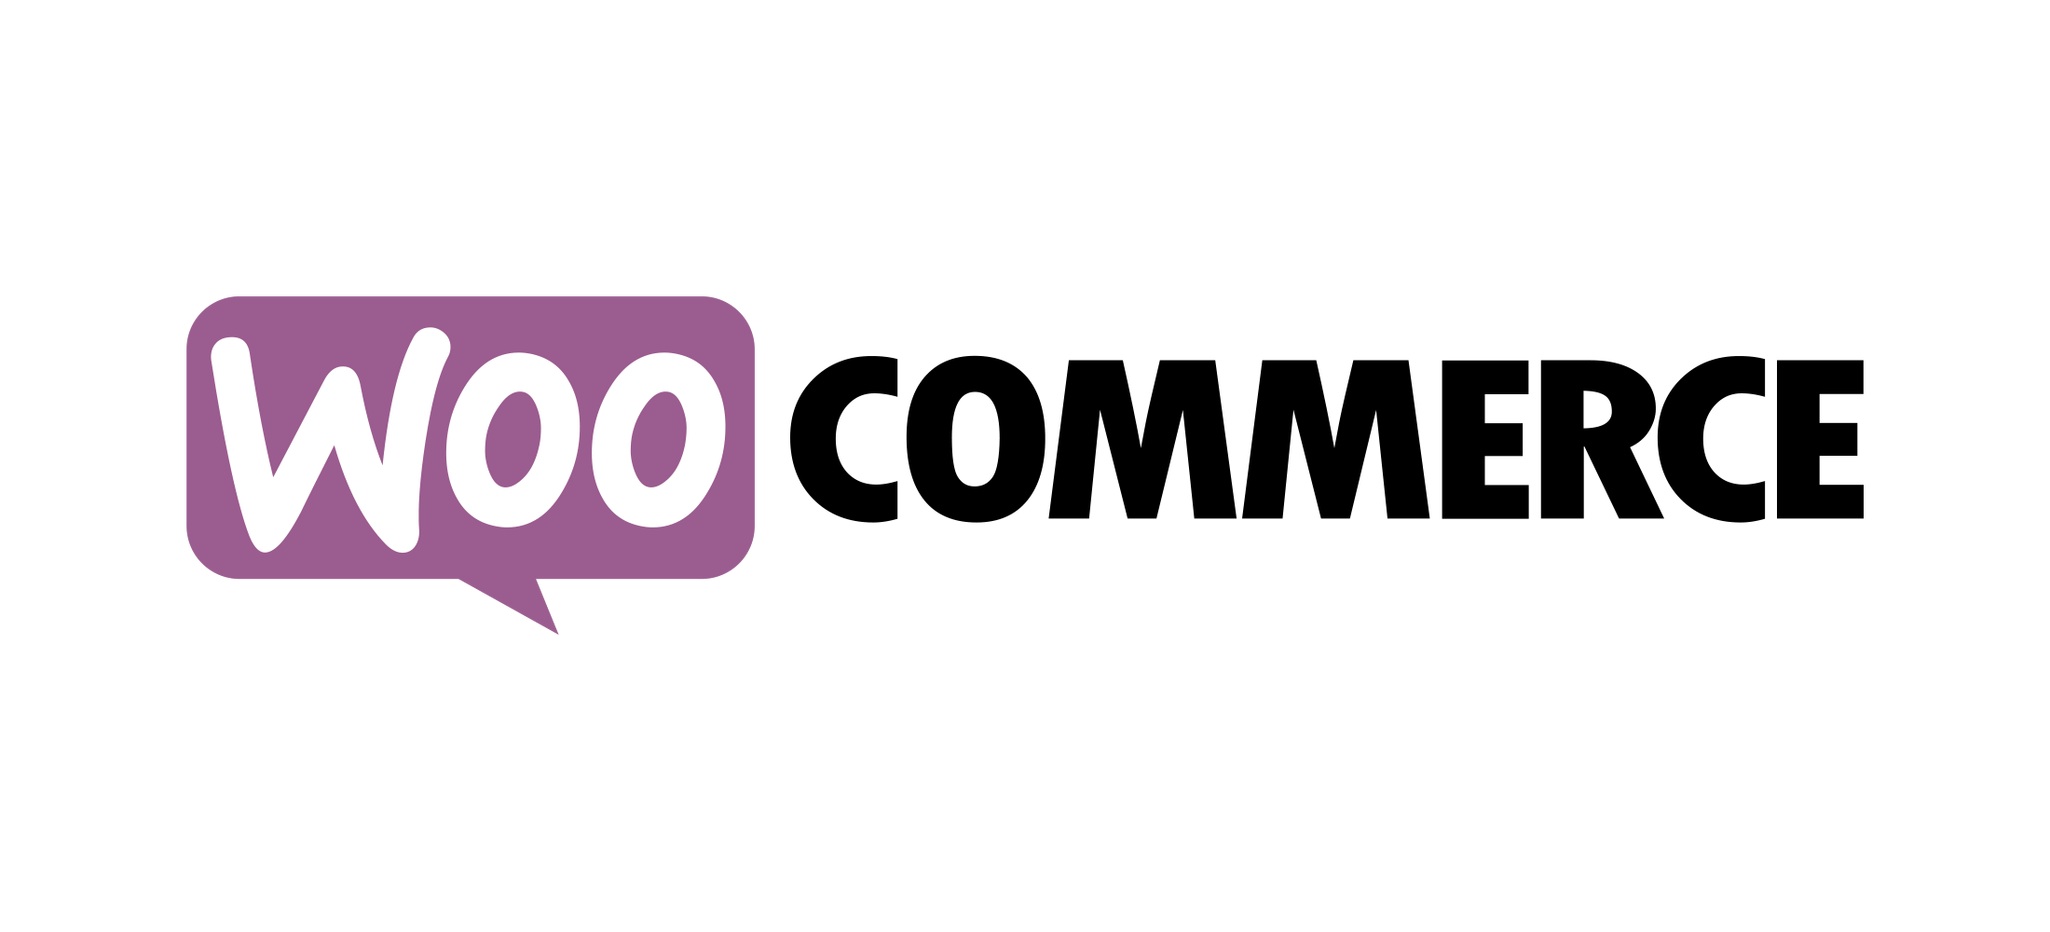 WooCommerce 3.2 to Introduce Pre-Update Extension Version Checks, Release Date Pushed Back to October 11